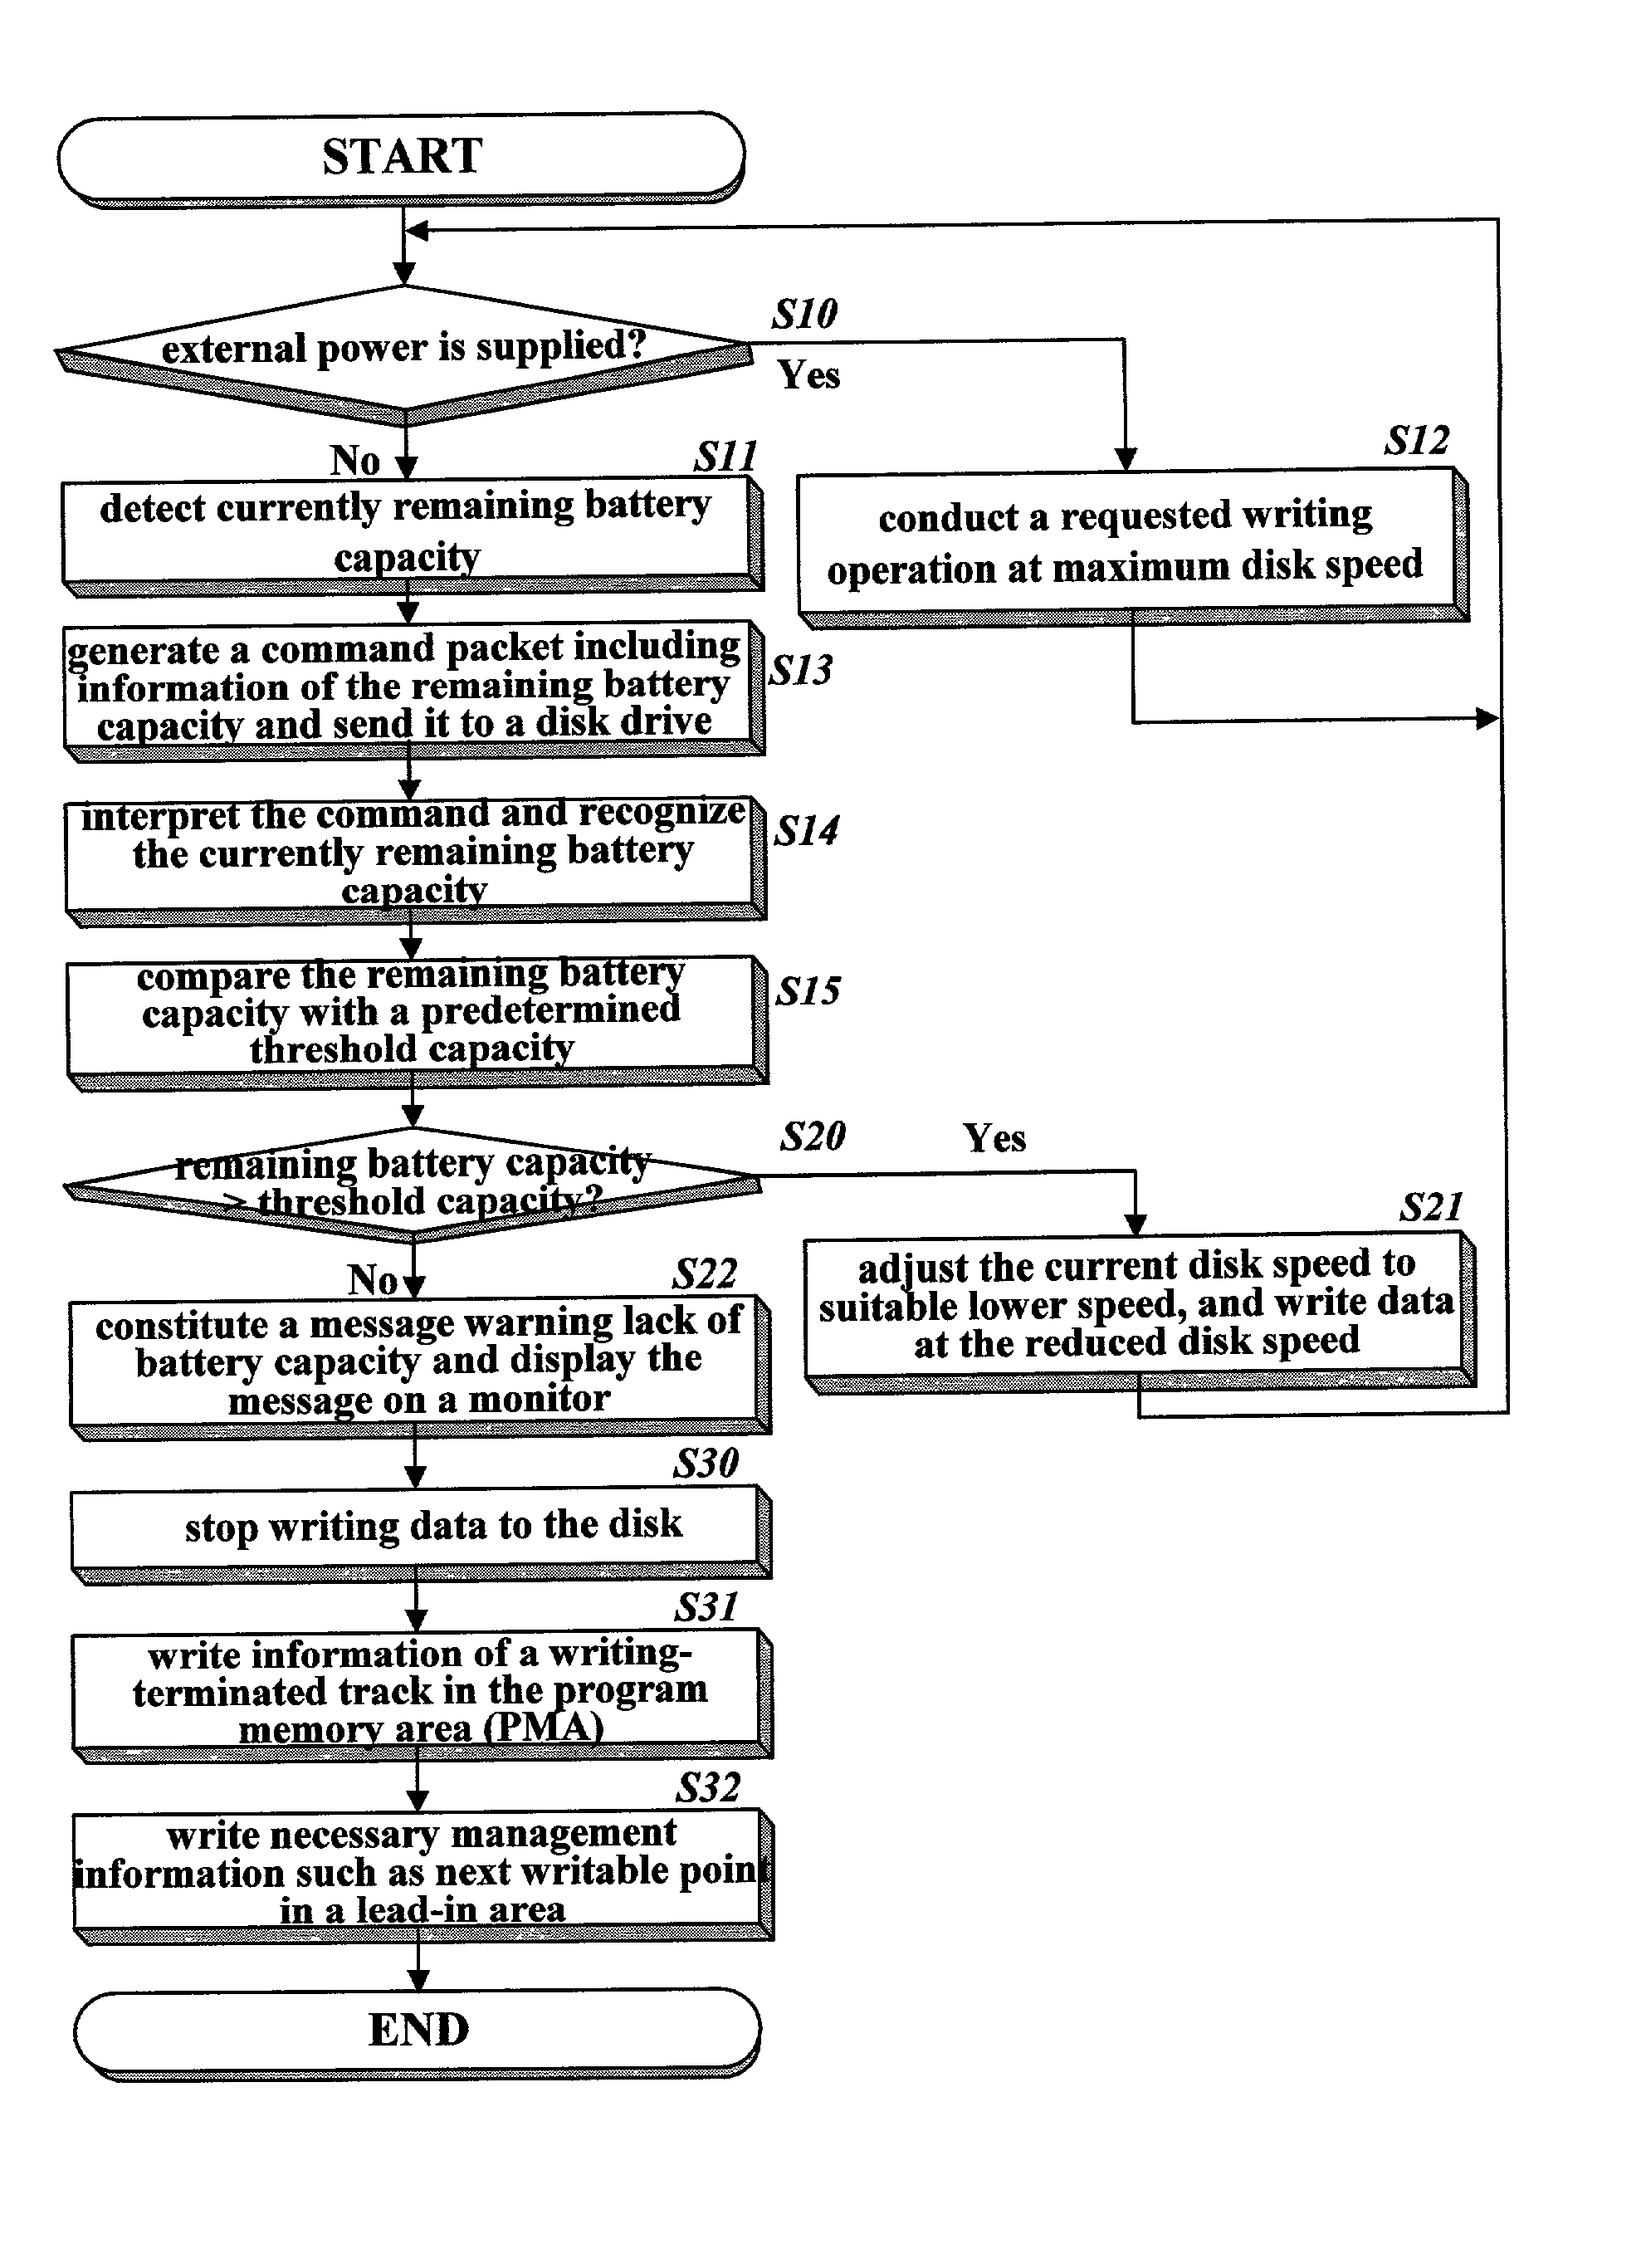 Method of controlling disk writing operation based on battery remaining capacity